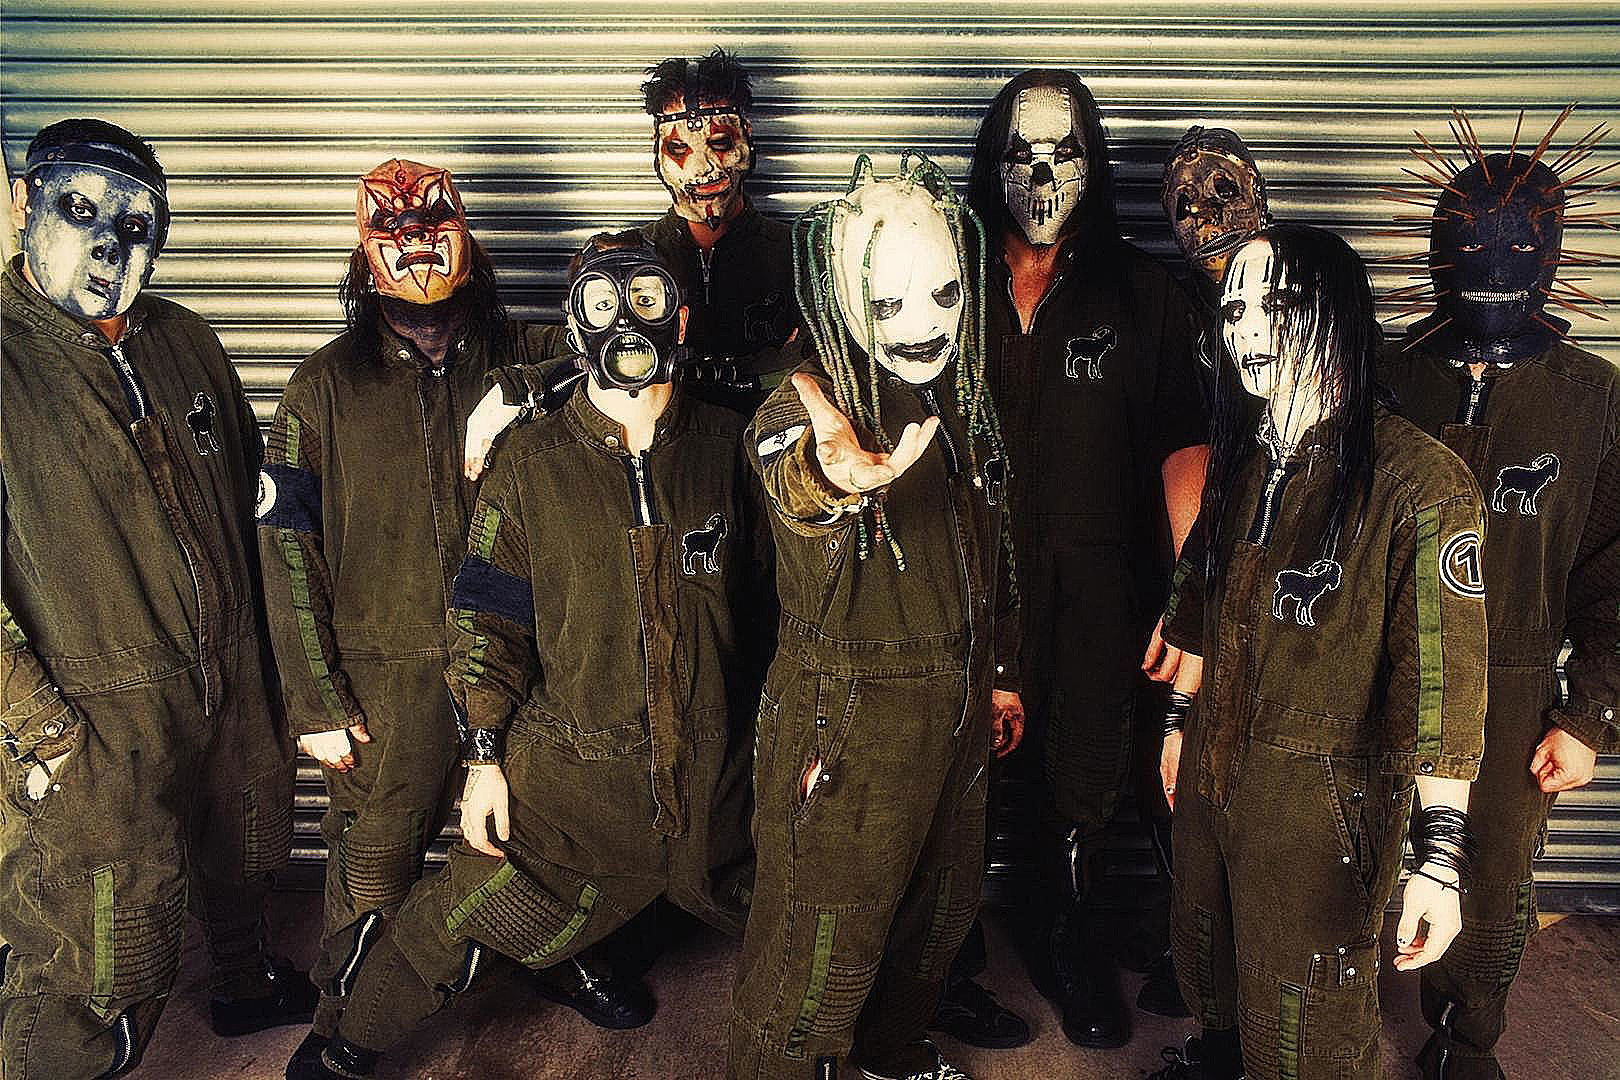 Shawn 'Clown' Crahan: Slipknot 'Hated Each Other' During 'Iowa'